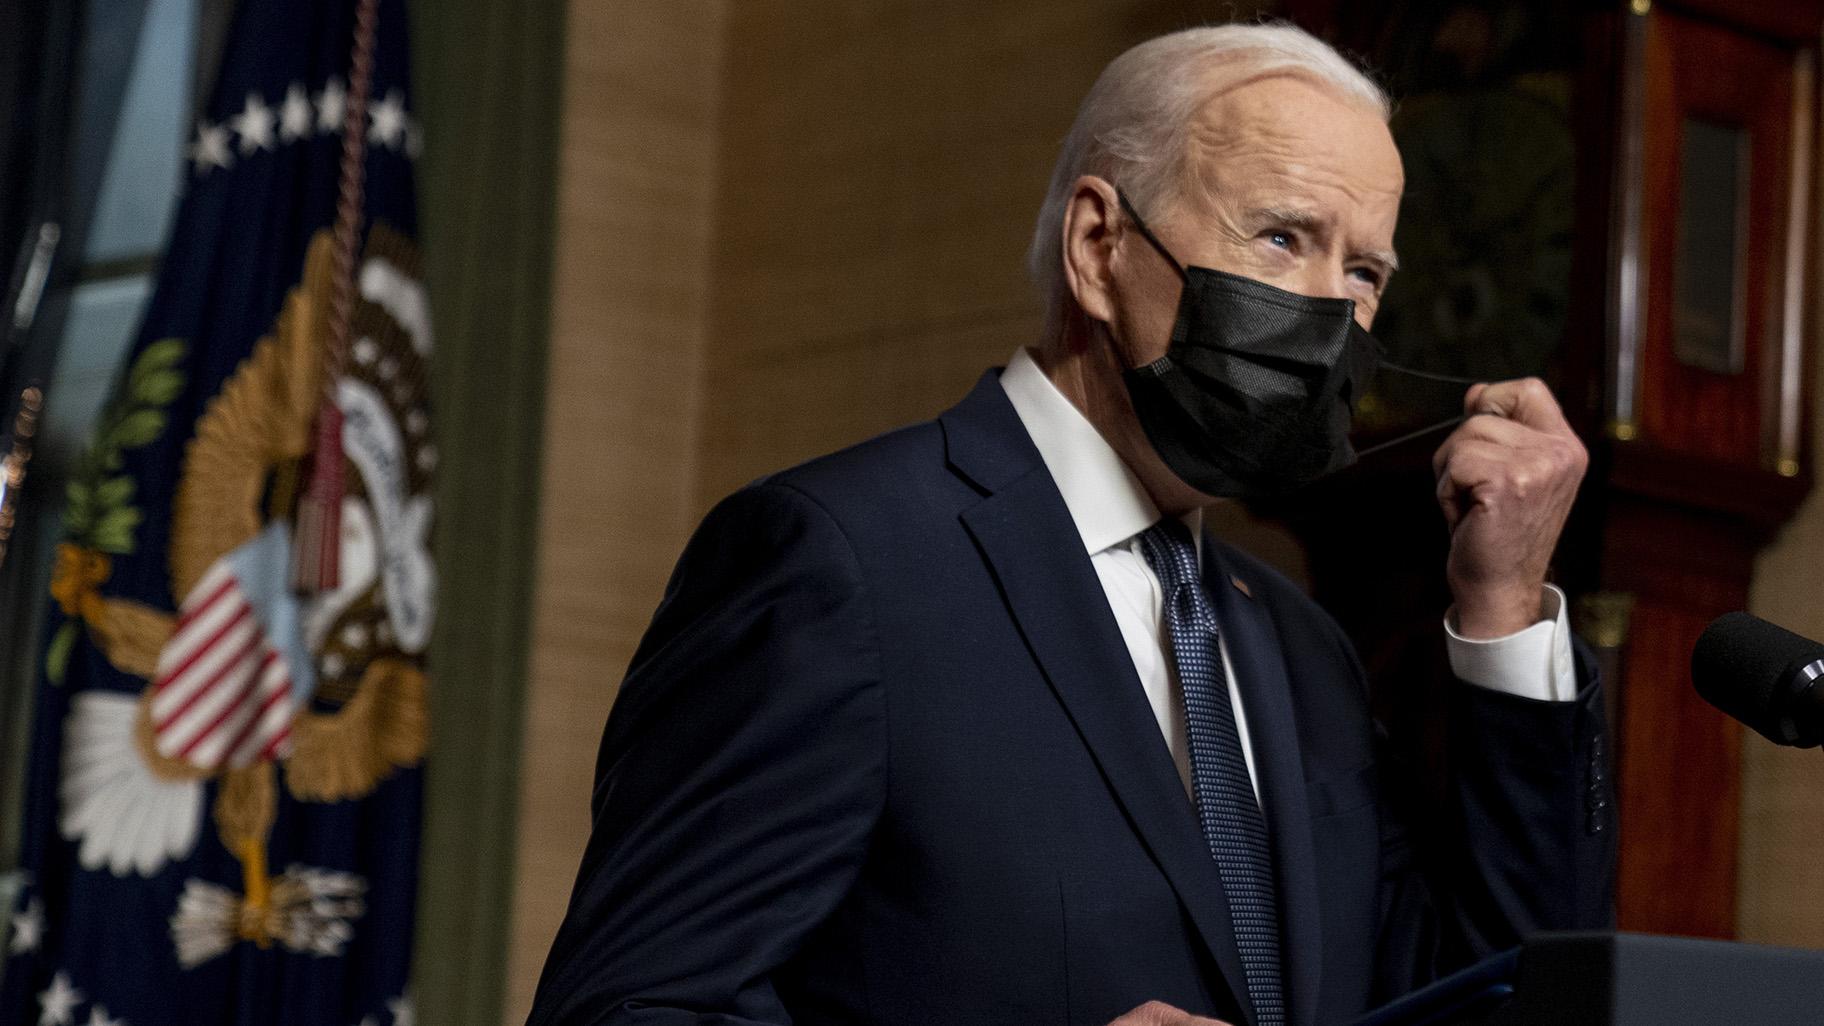 In this Wednesday, April 14, 2021, file photo, President Joe Biden removes his mask to speak at a news conference at the White House, in Washington. (AP Photo / Andrew Harnik, Pool, File)